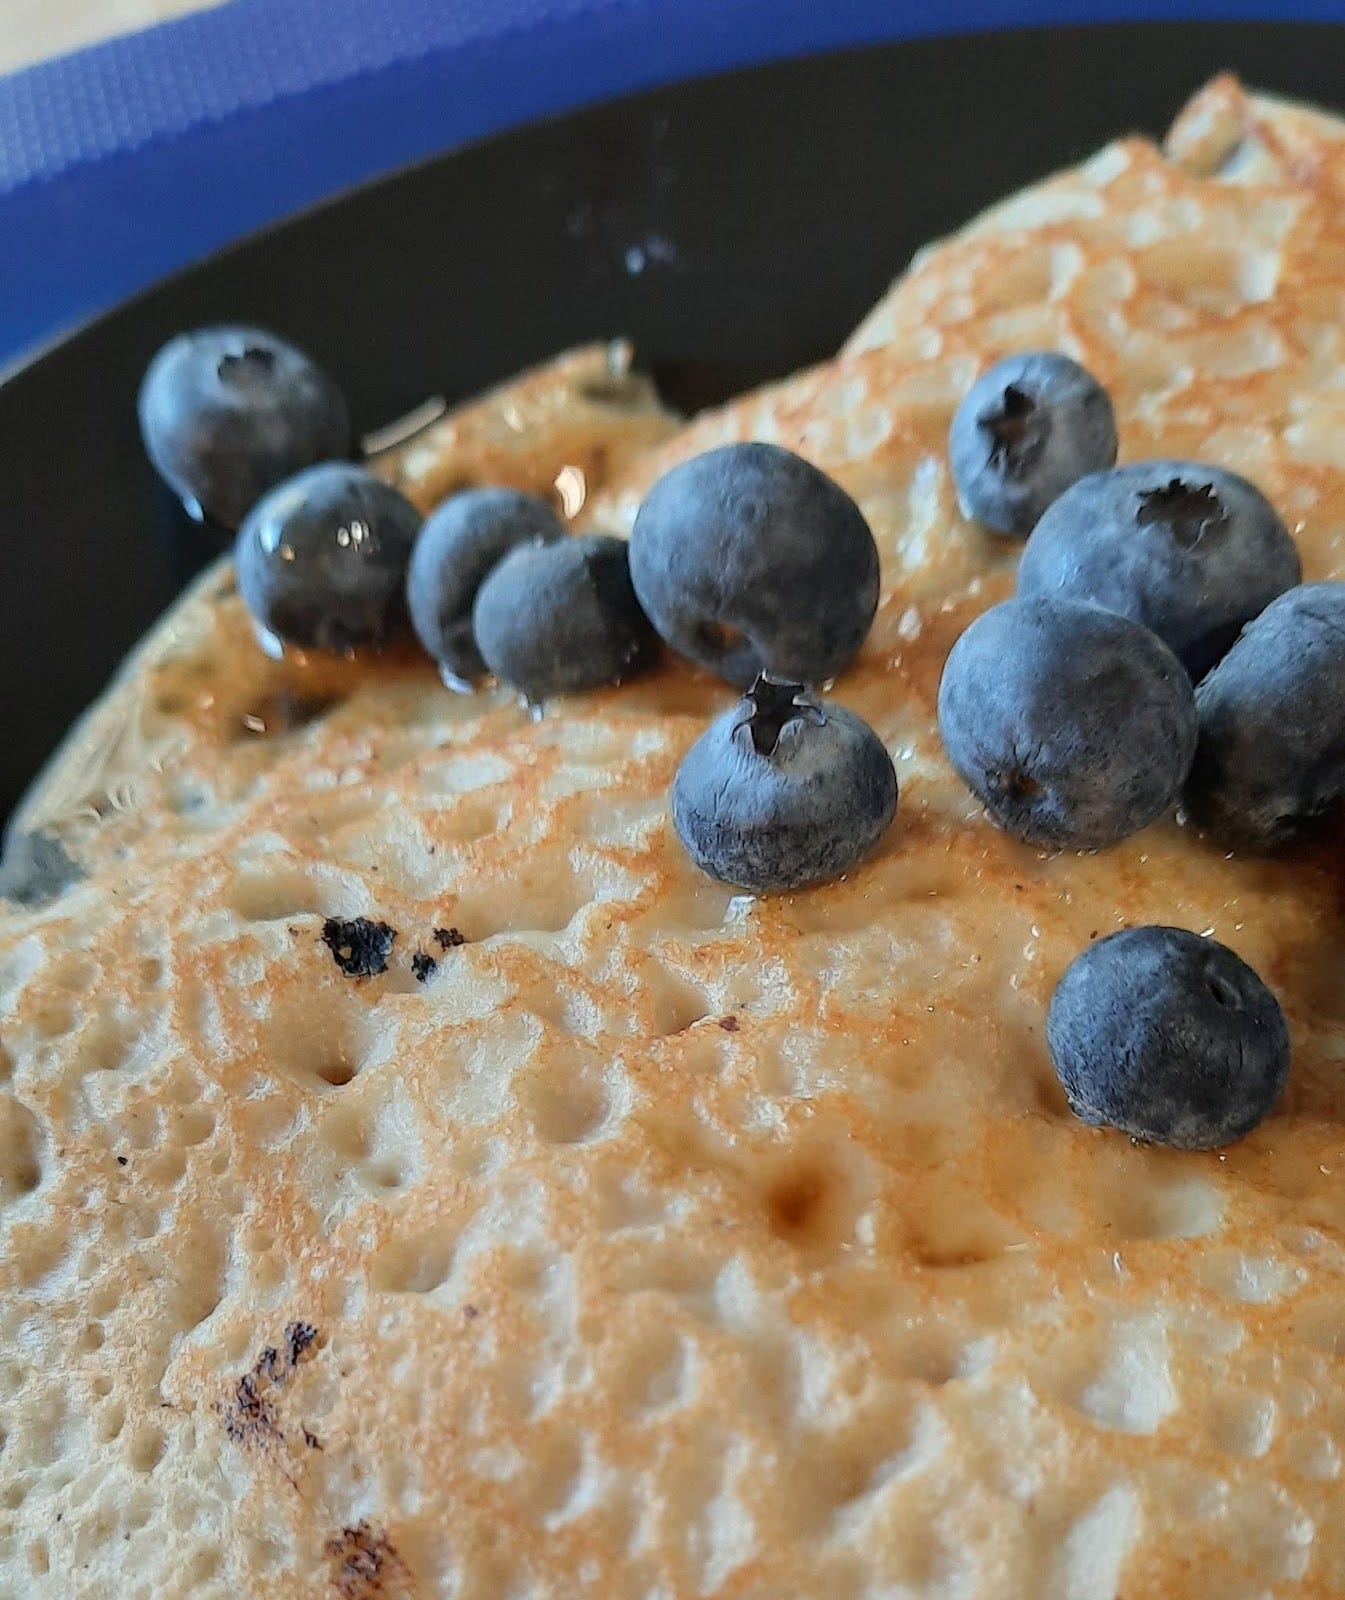 Blueberries with syrup on light brown and pale yellow pancakes on a black plate.